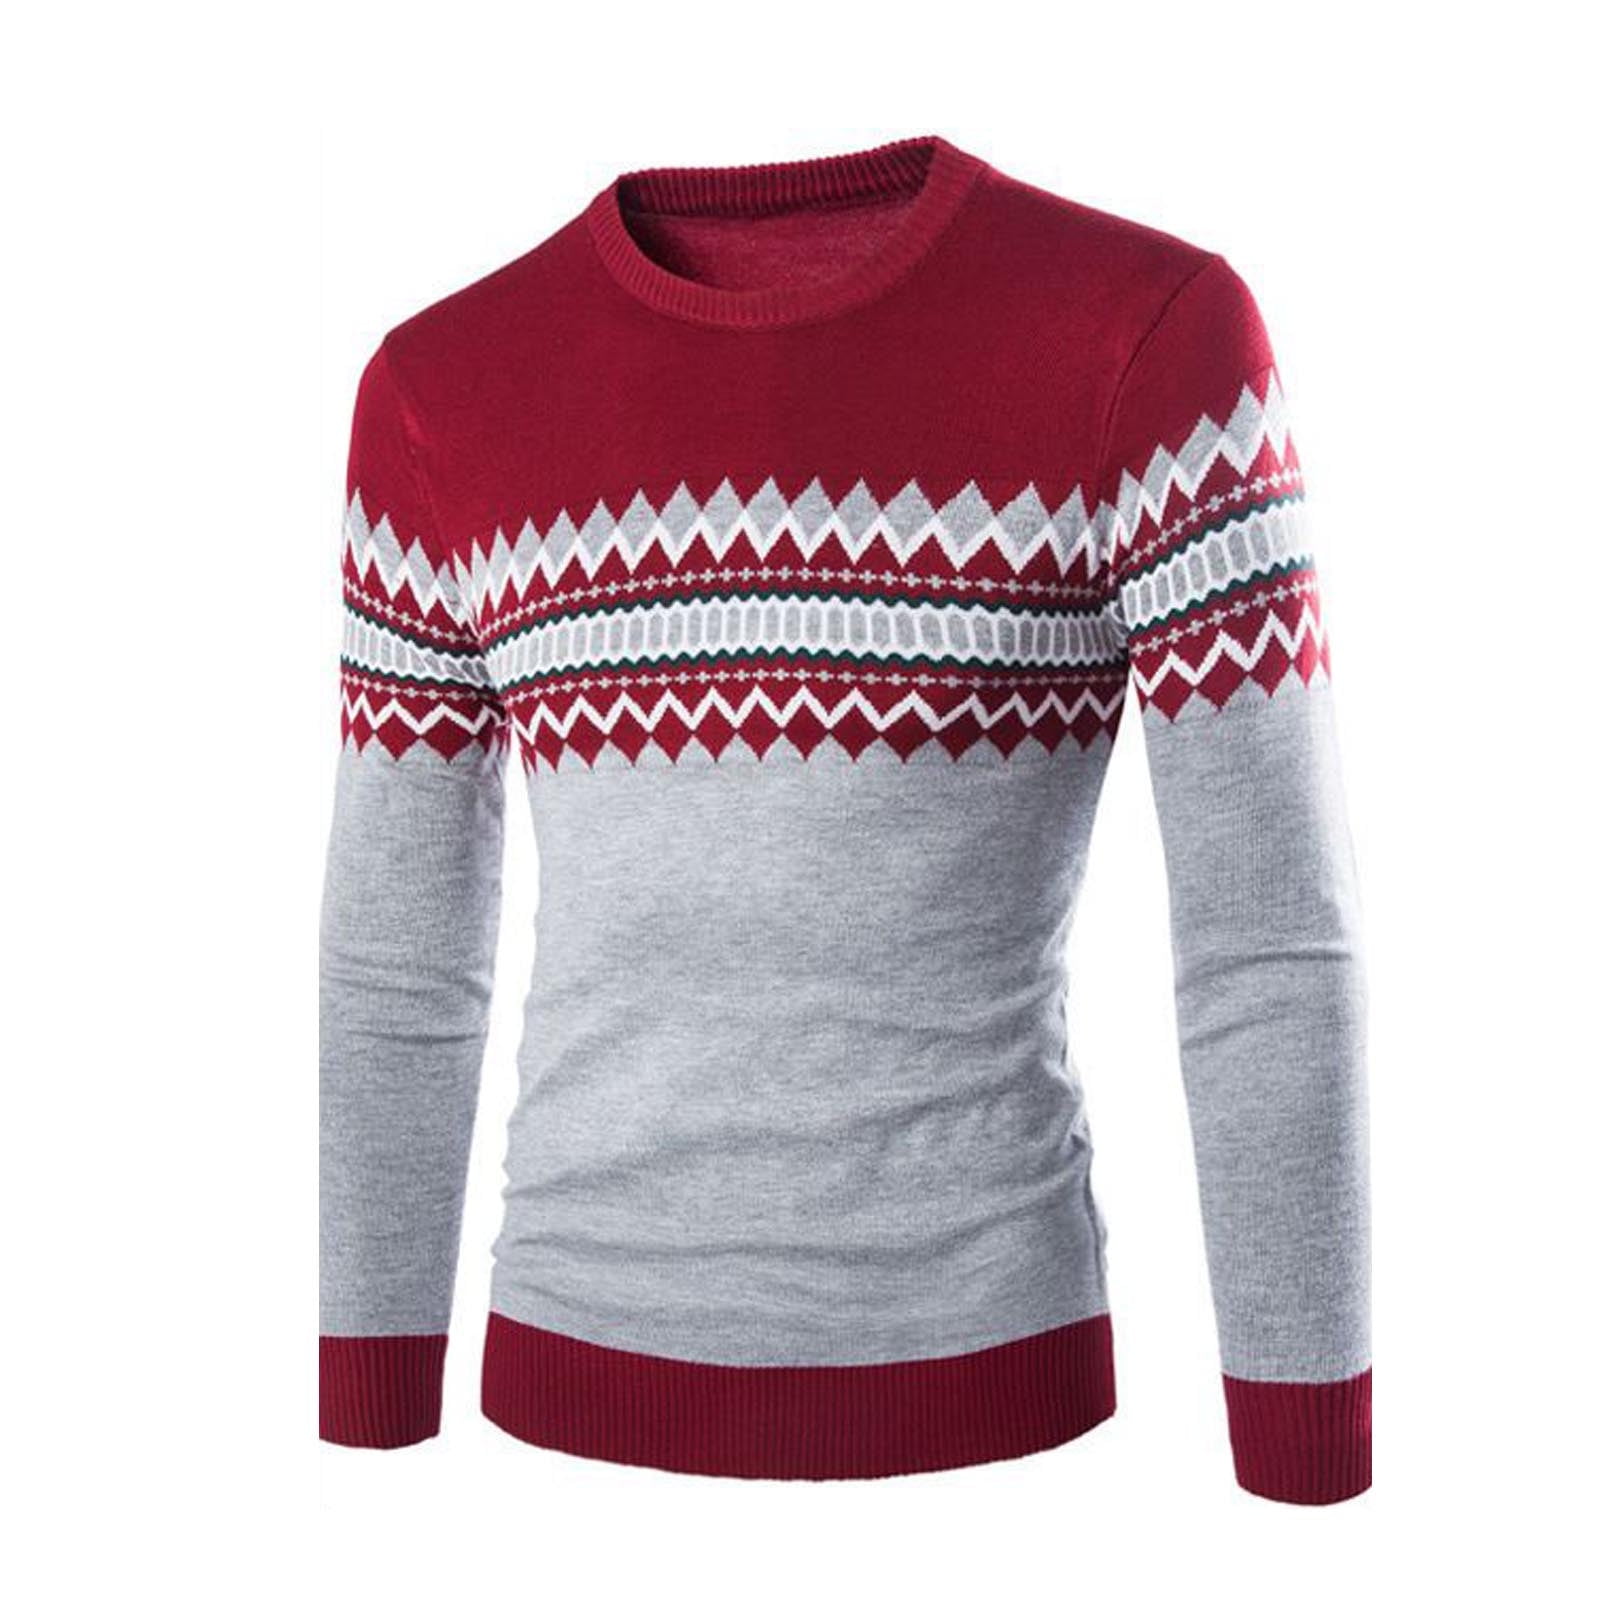 ZCFZJW Fair Isle Sweater Men Casual Round Neck Pullover Sweaters Ribbed ...